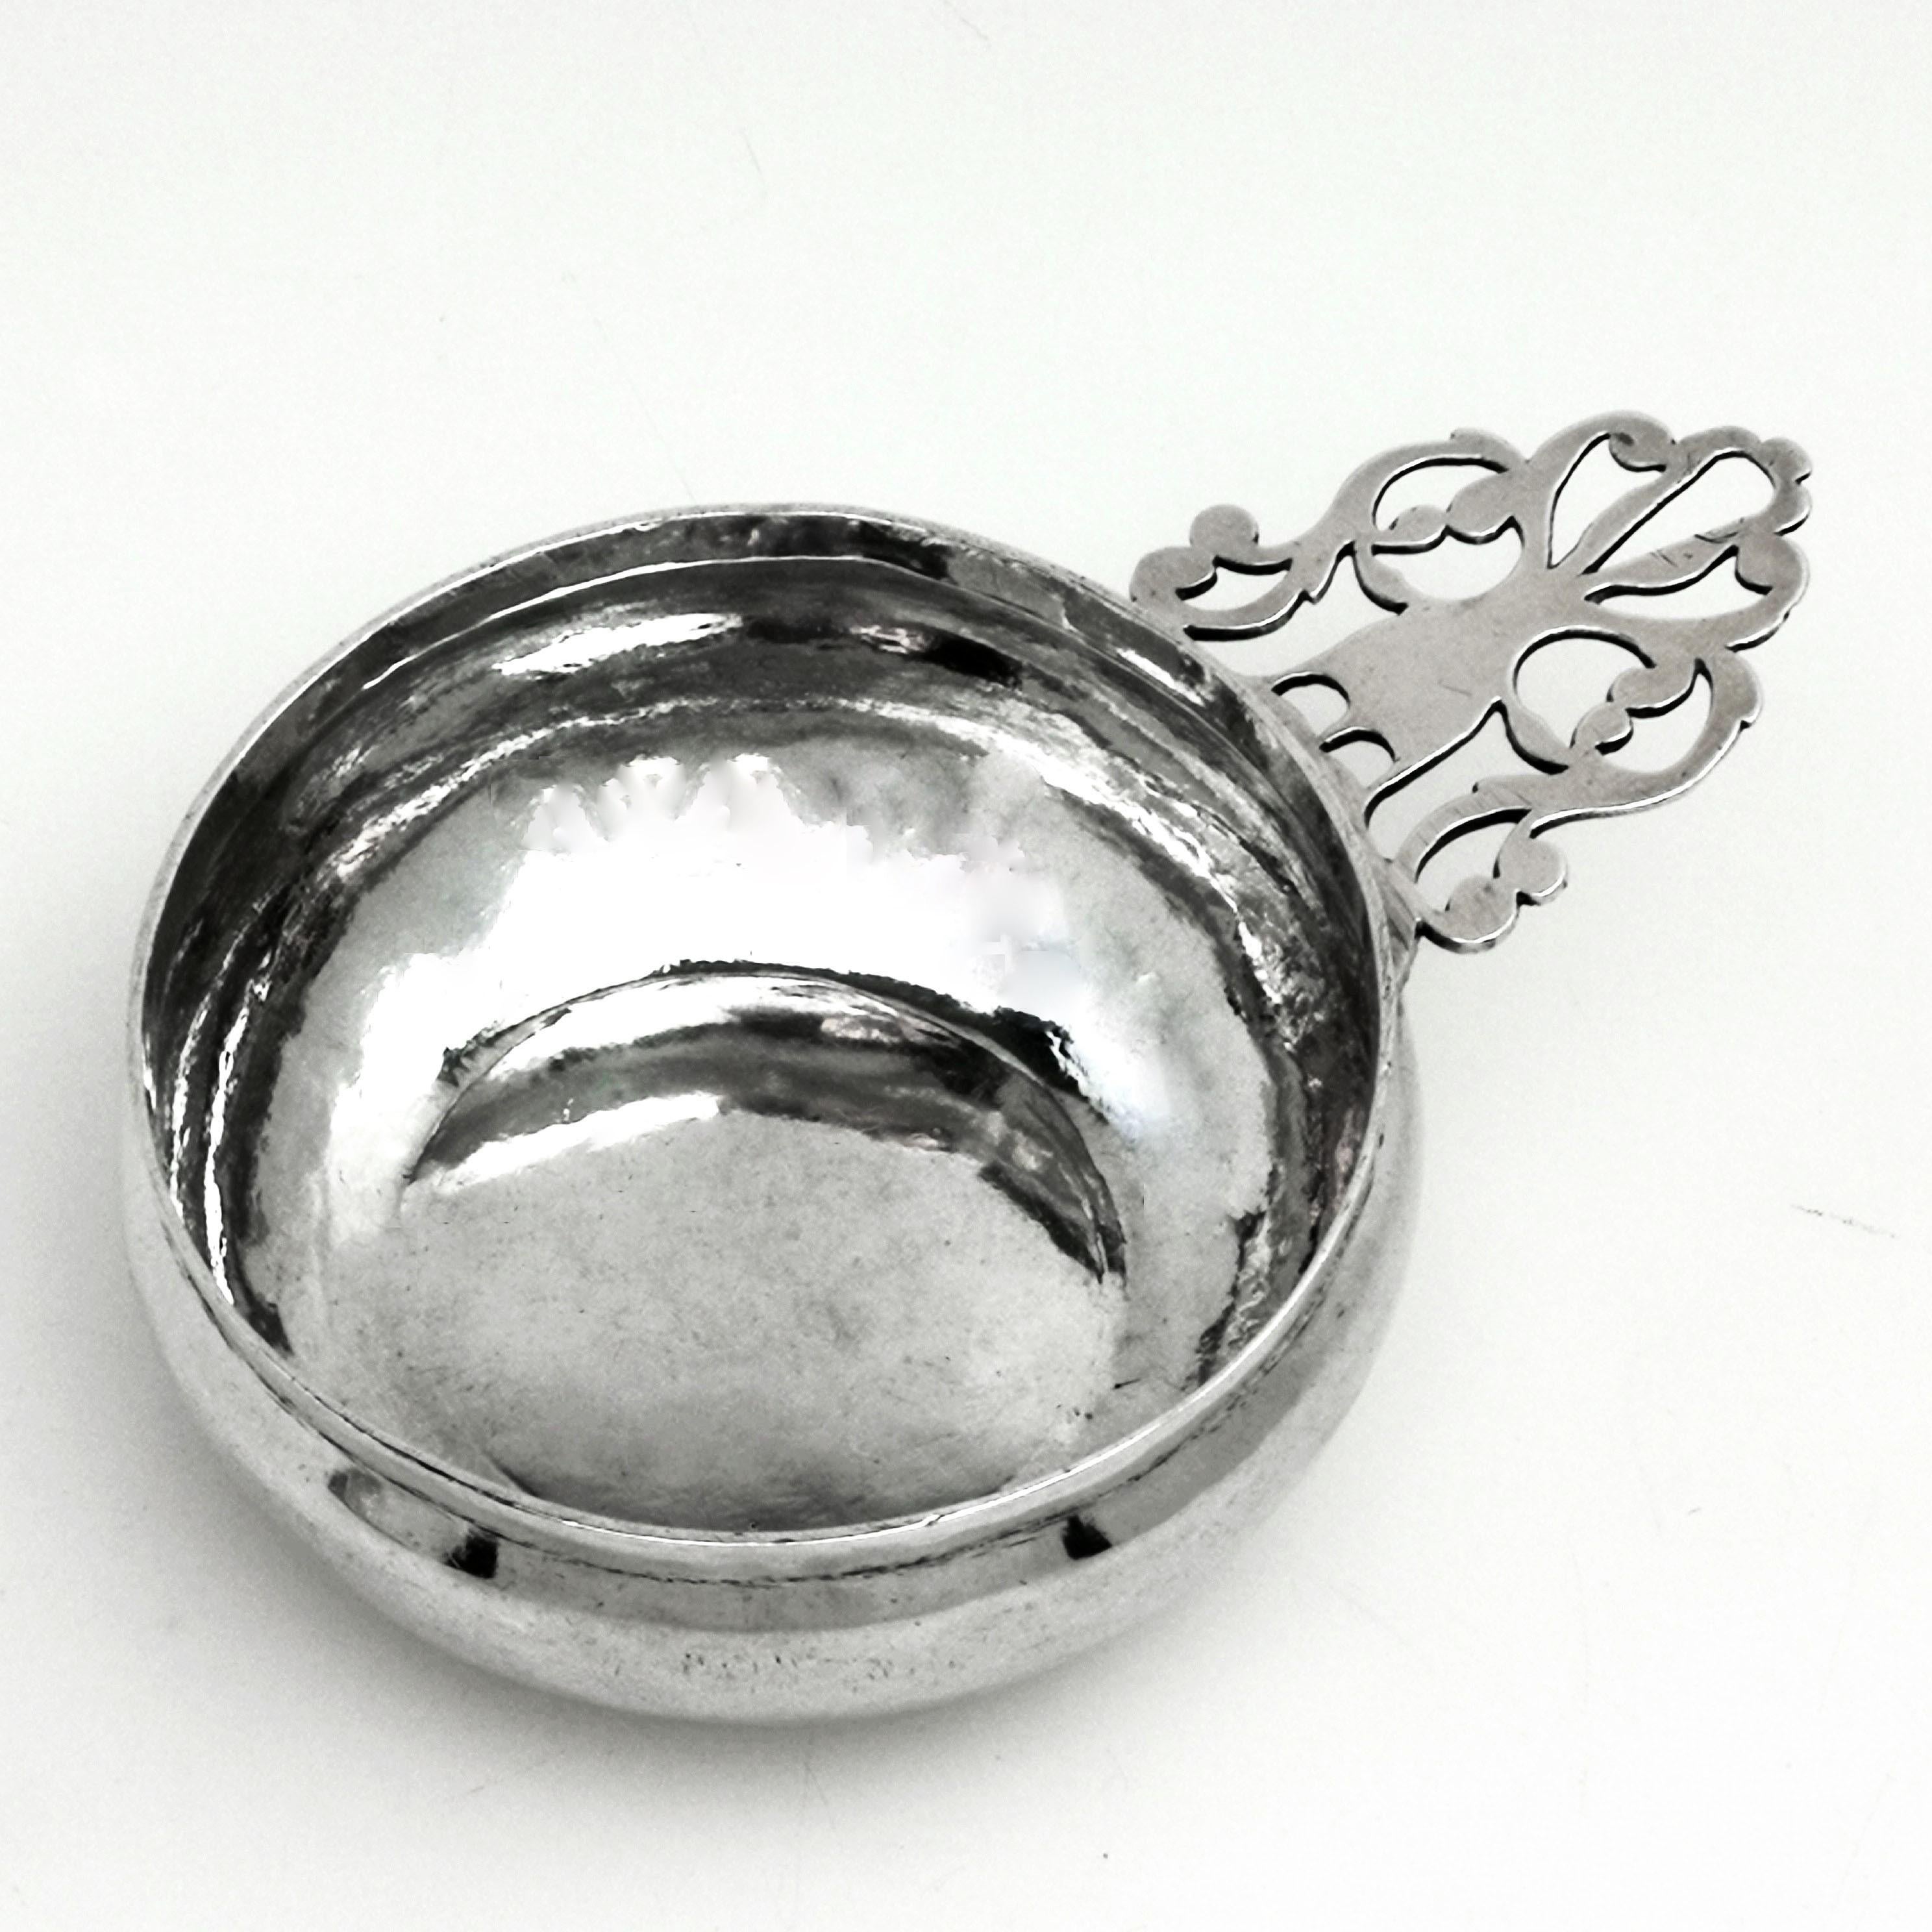 An excellent Queen Anne solid silver bleeding bowl / dish with a magnificent pierced handle. The bowl has a slightly bellied shape with a narrow straight sided upper rim. The underside of the handle is engraved with the letters T A T surrounding a